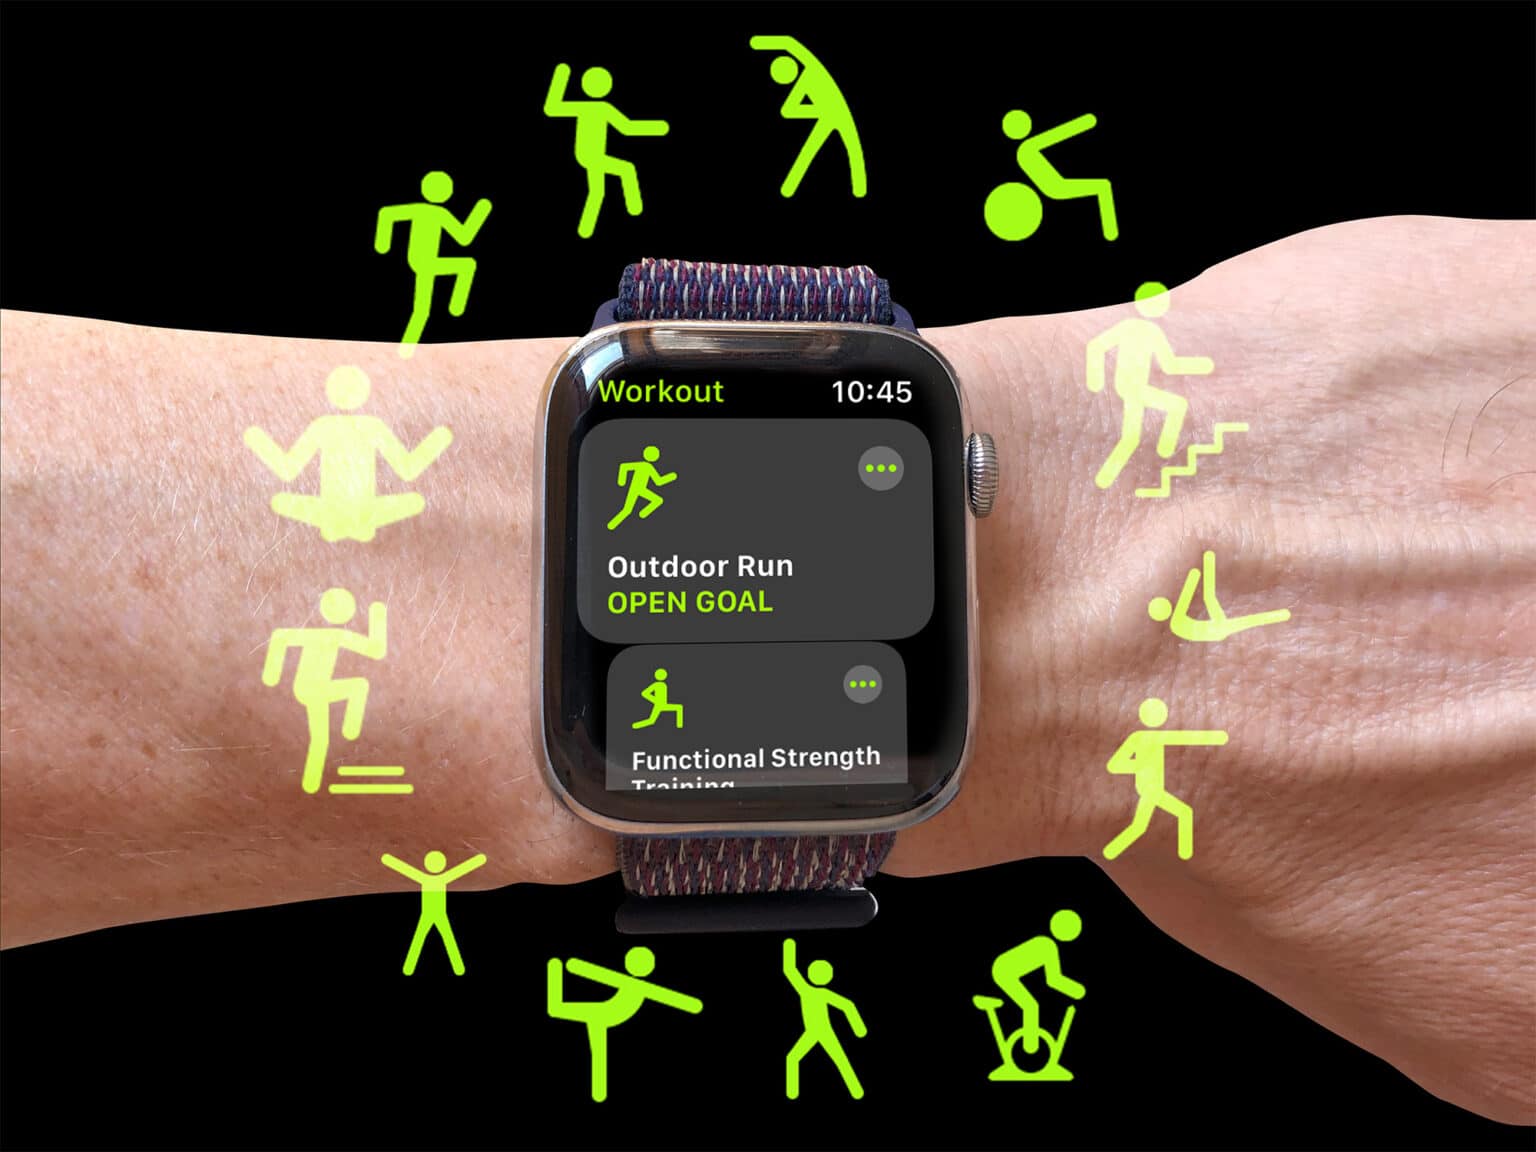 How to mix up activities for a more effective Apple Watch workout